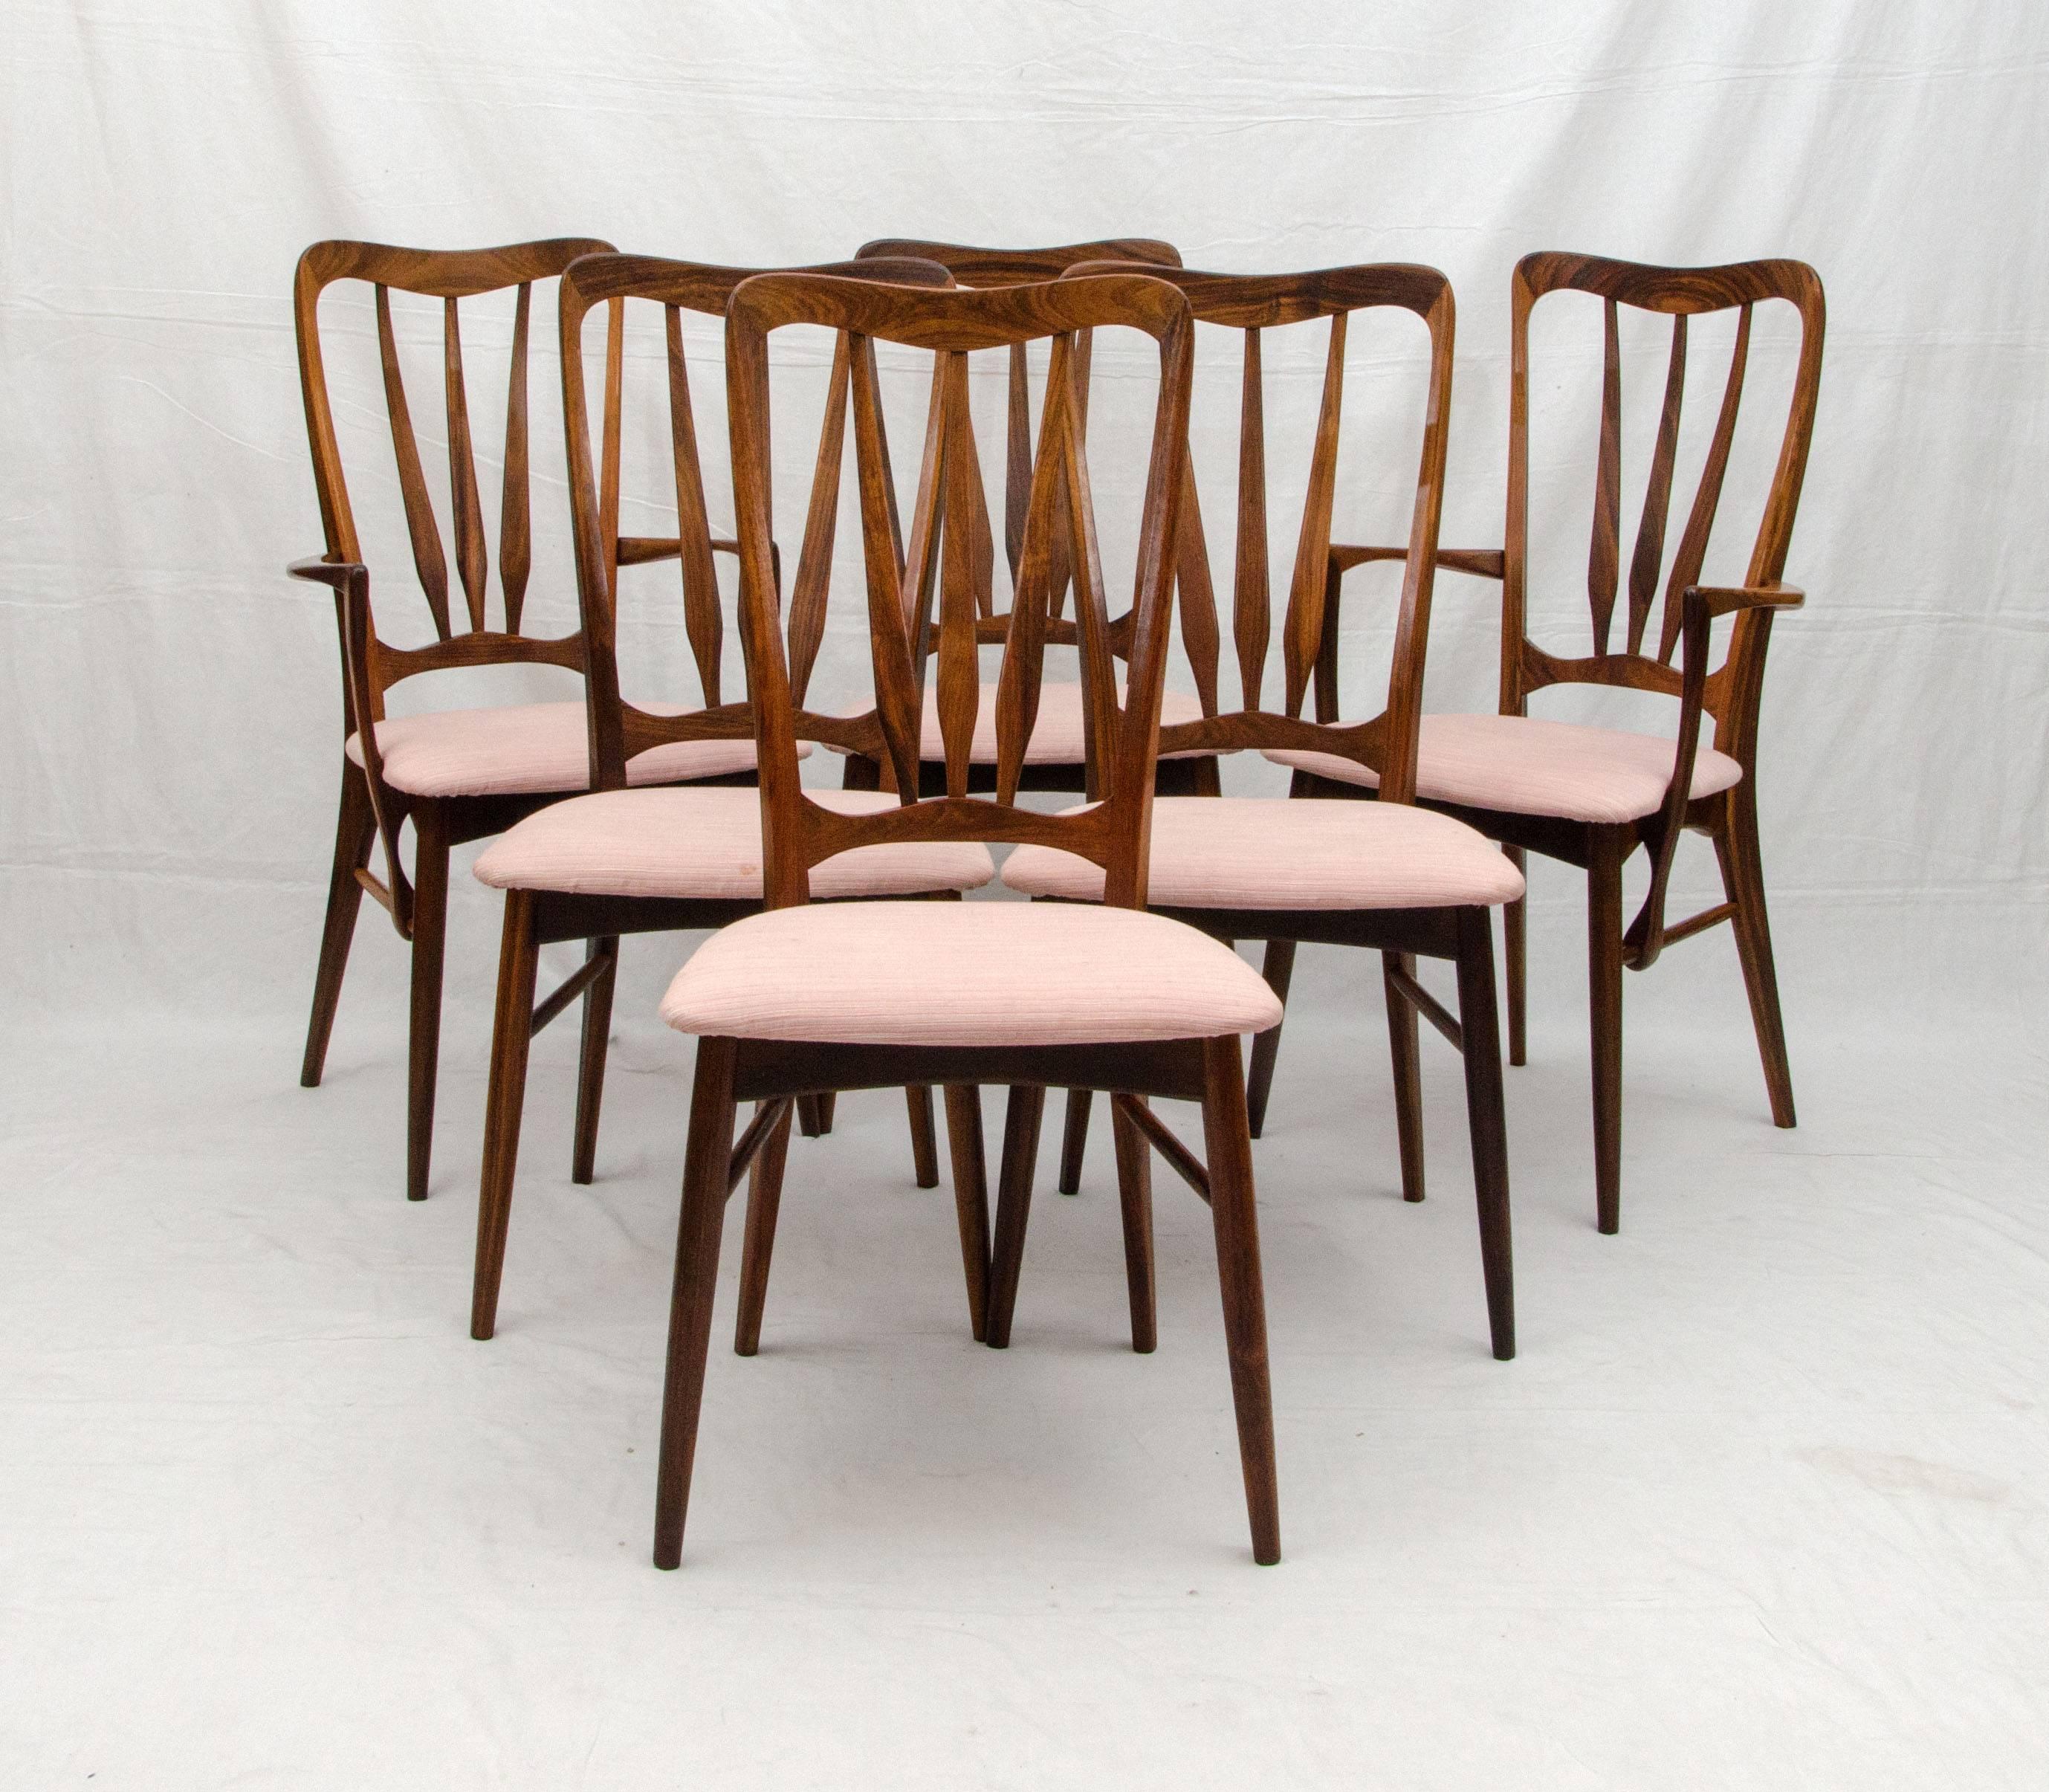 Very nice set of six Danish rosewood dining chairs, two armchairs and four side chairs. Designed by Niels Koefoed for Koefoed Hornslet. Some evidence of Danish Control tags, Koefoeds tags and made in Denmark tags. Curvy design with a taller back and